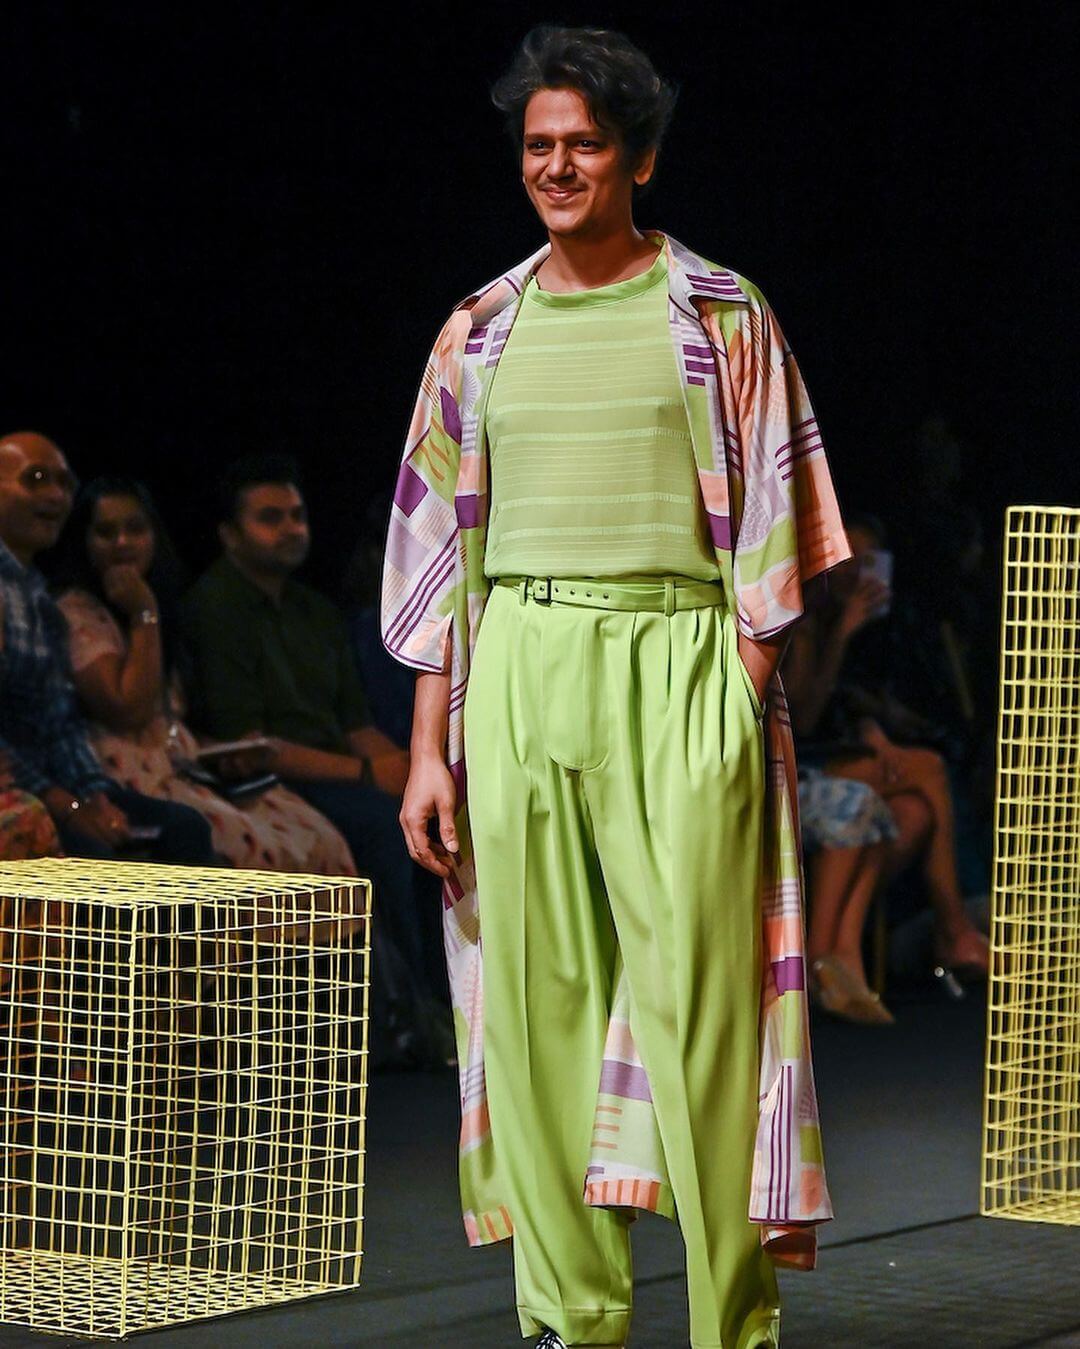 Vijay Verma Nailed The Show In a Comfy And Oversized Yellow Outfit